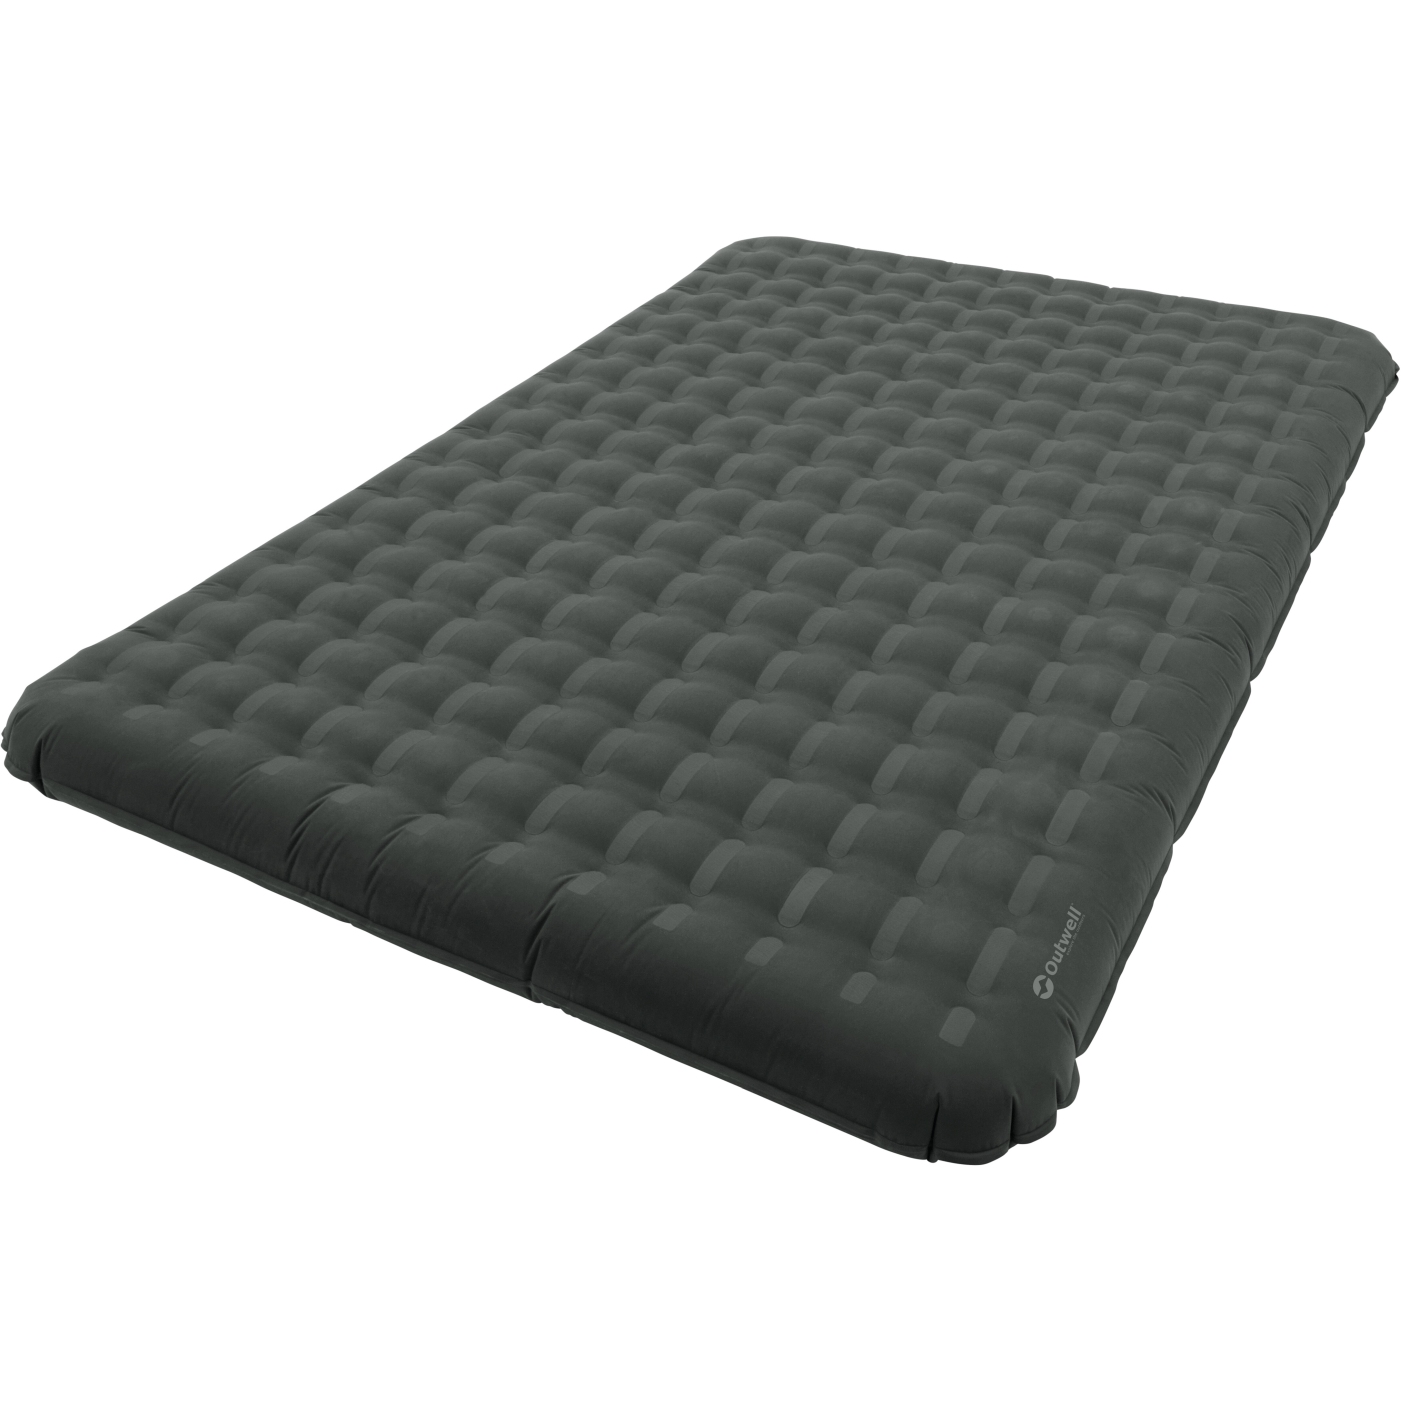 Productfoto van Outwell Flow Airbed Double Luchtbed - Zwart